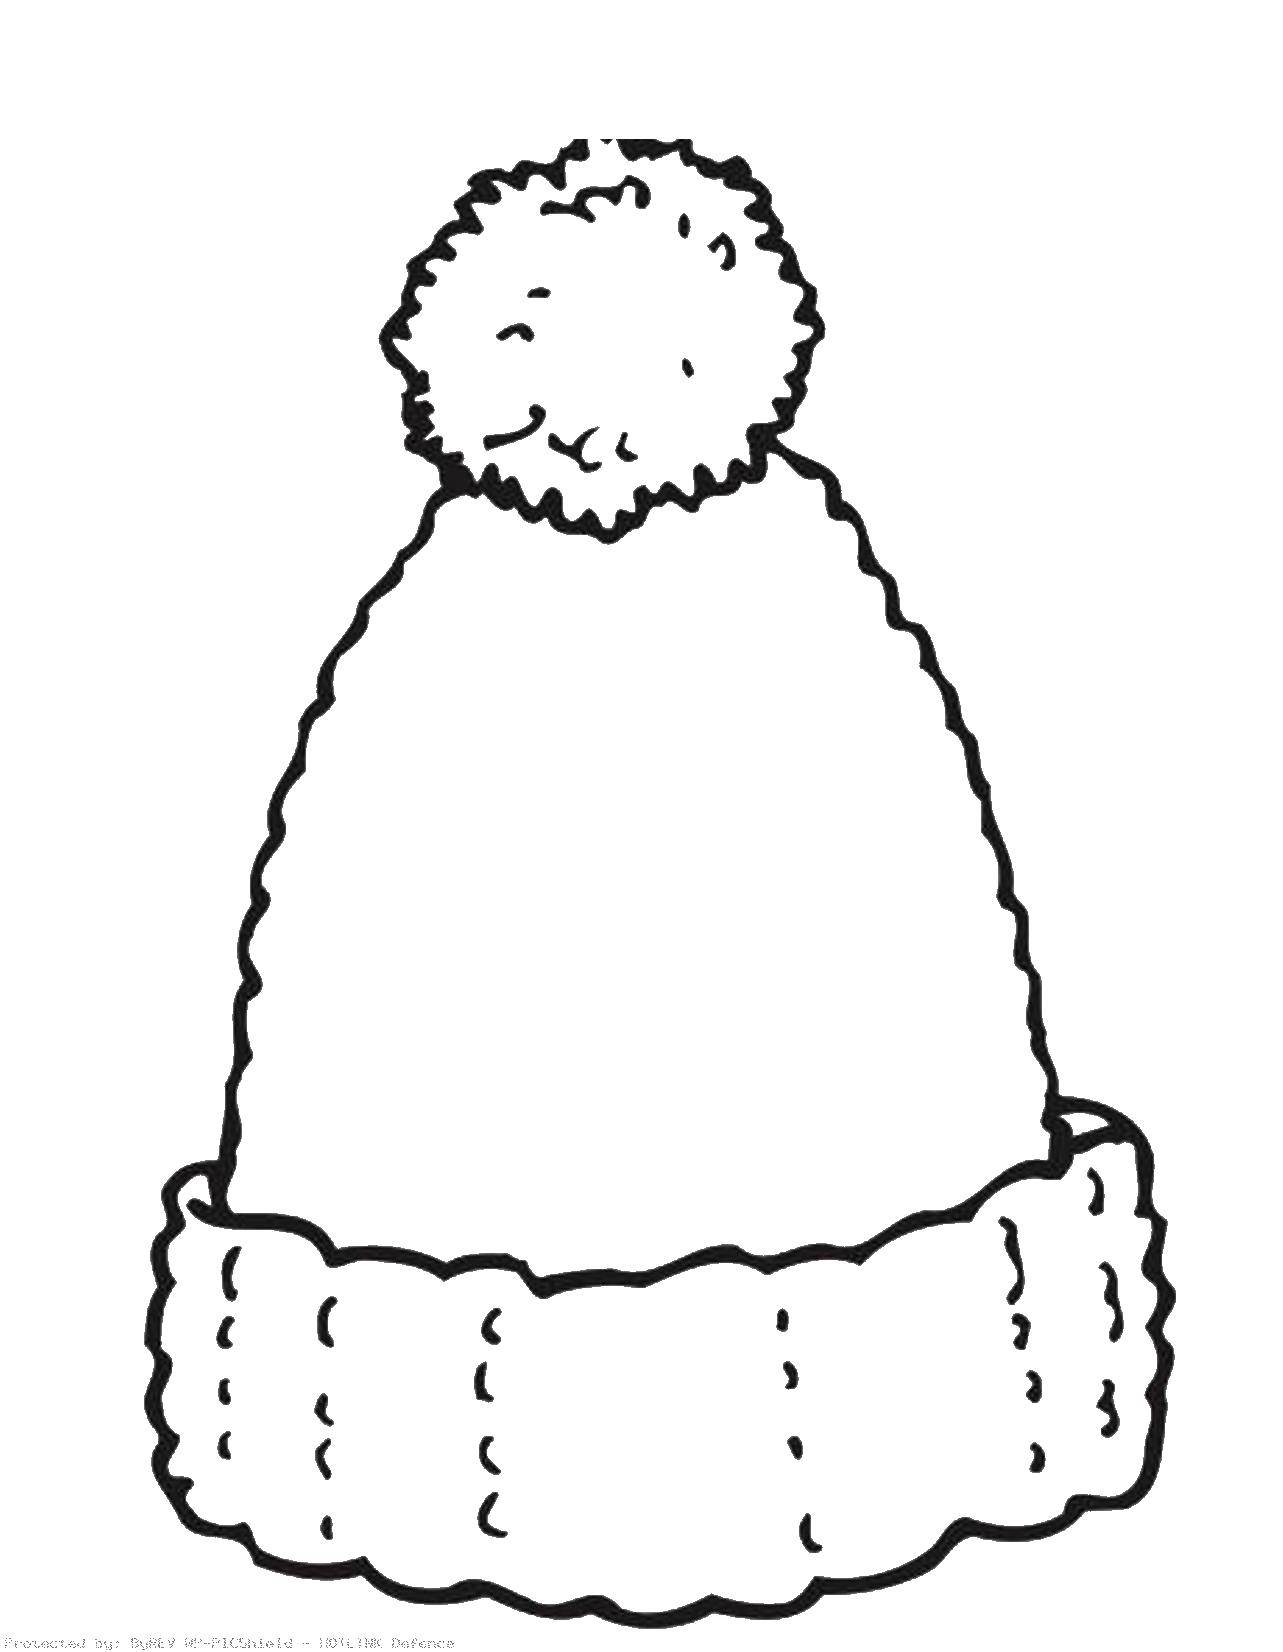 Coloring Hat with bell. Category Clothing. Tags:  Clothes, winter hat.